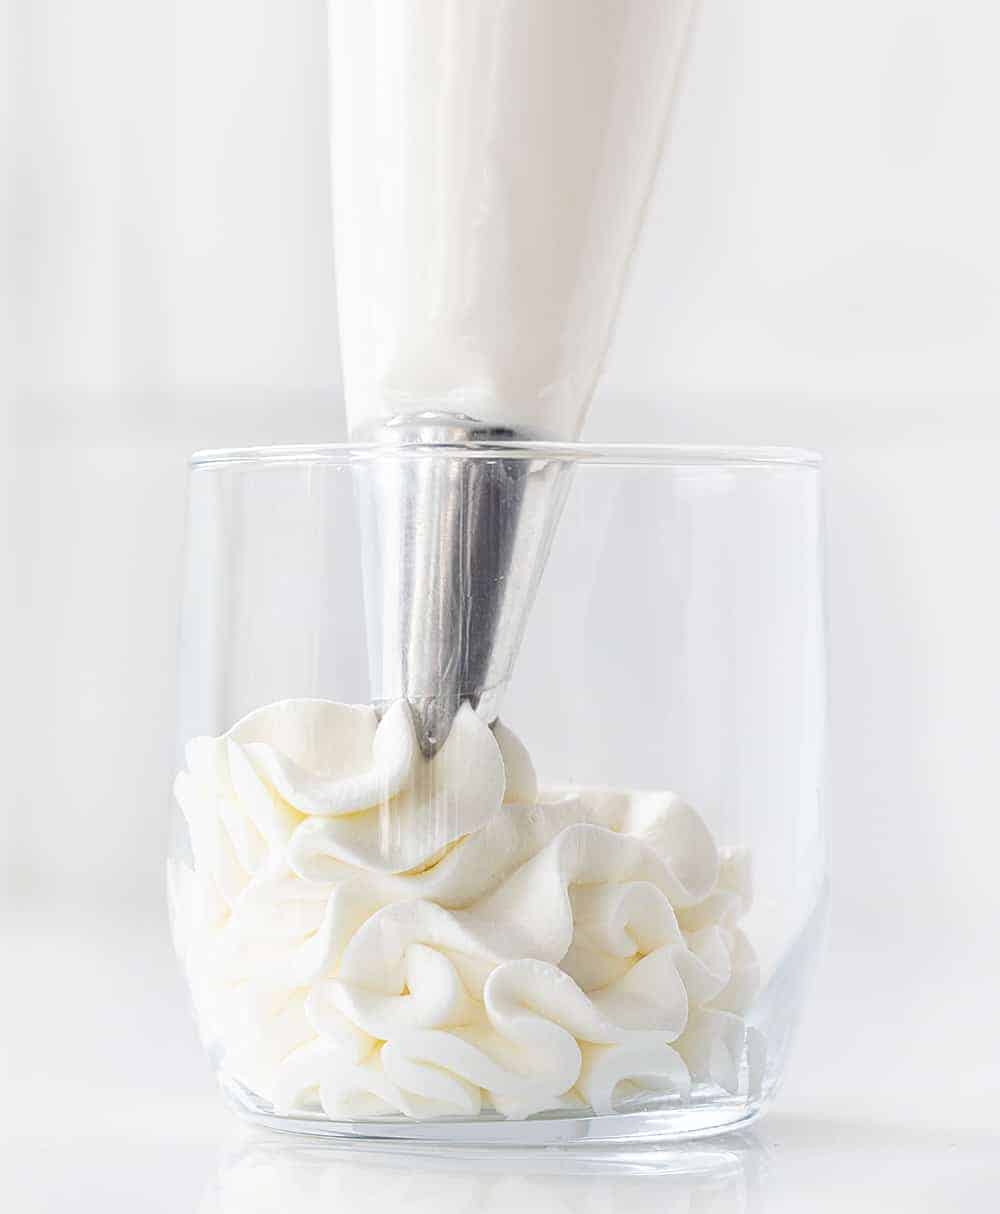 Piping Bag Filled with Homemade Whipped Cream Piping it Into Glass